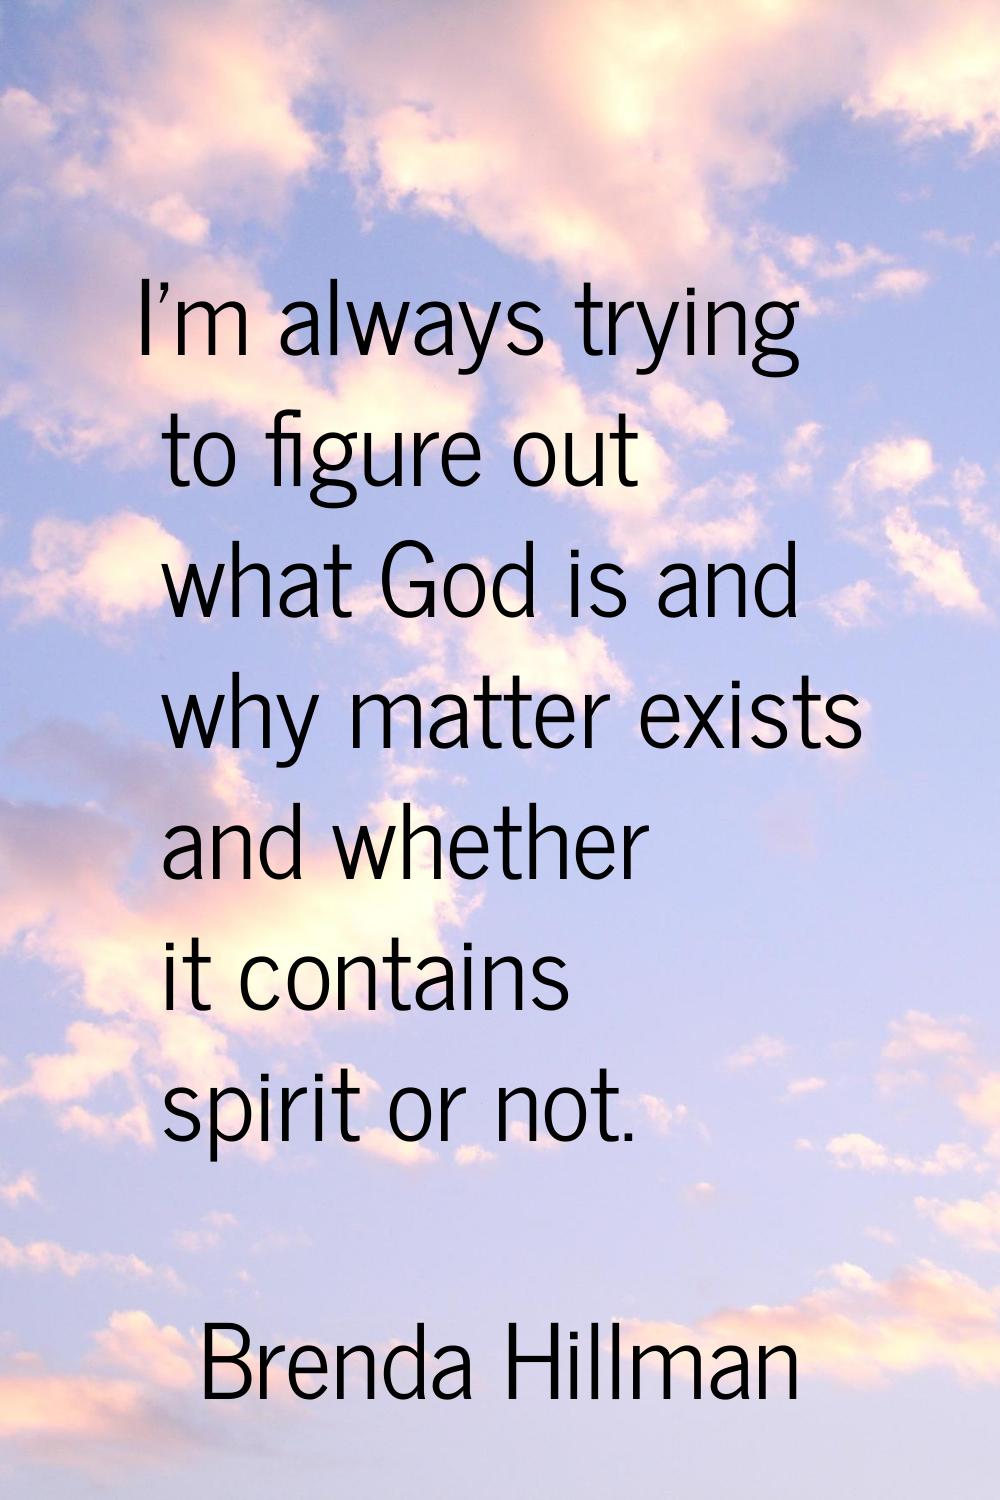 I'm always trying to figure out what God is and why matter exists and whether it contains spirit or